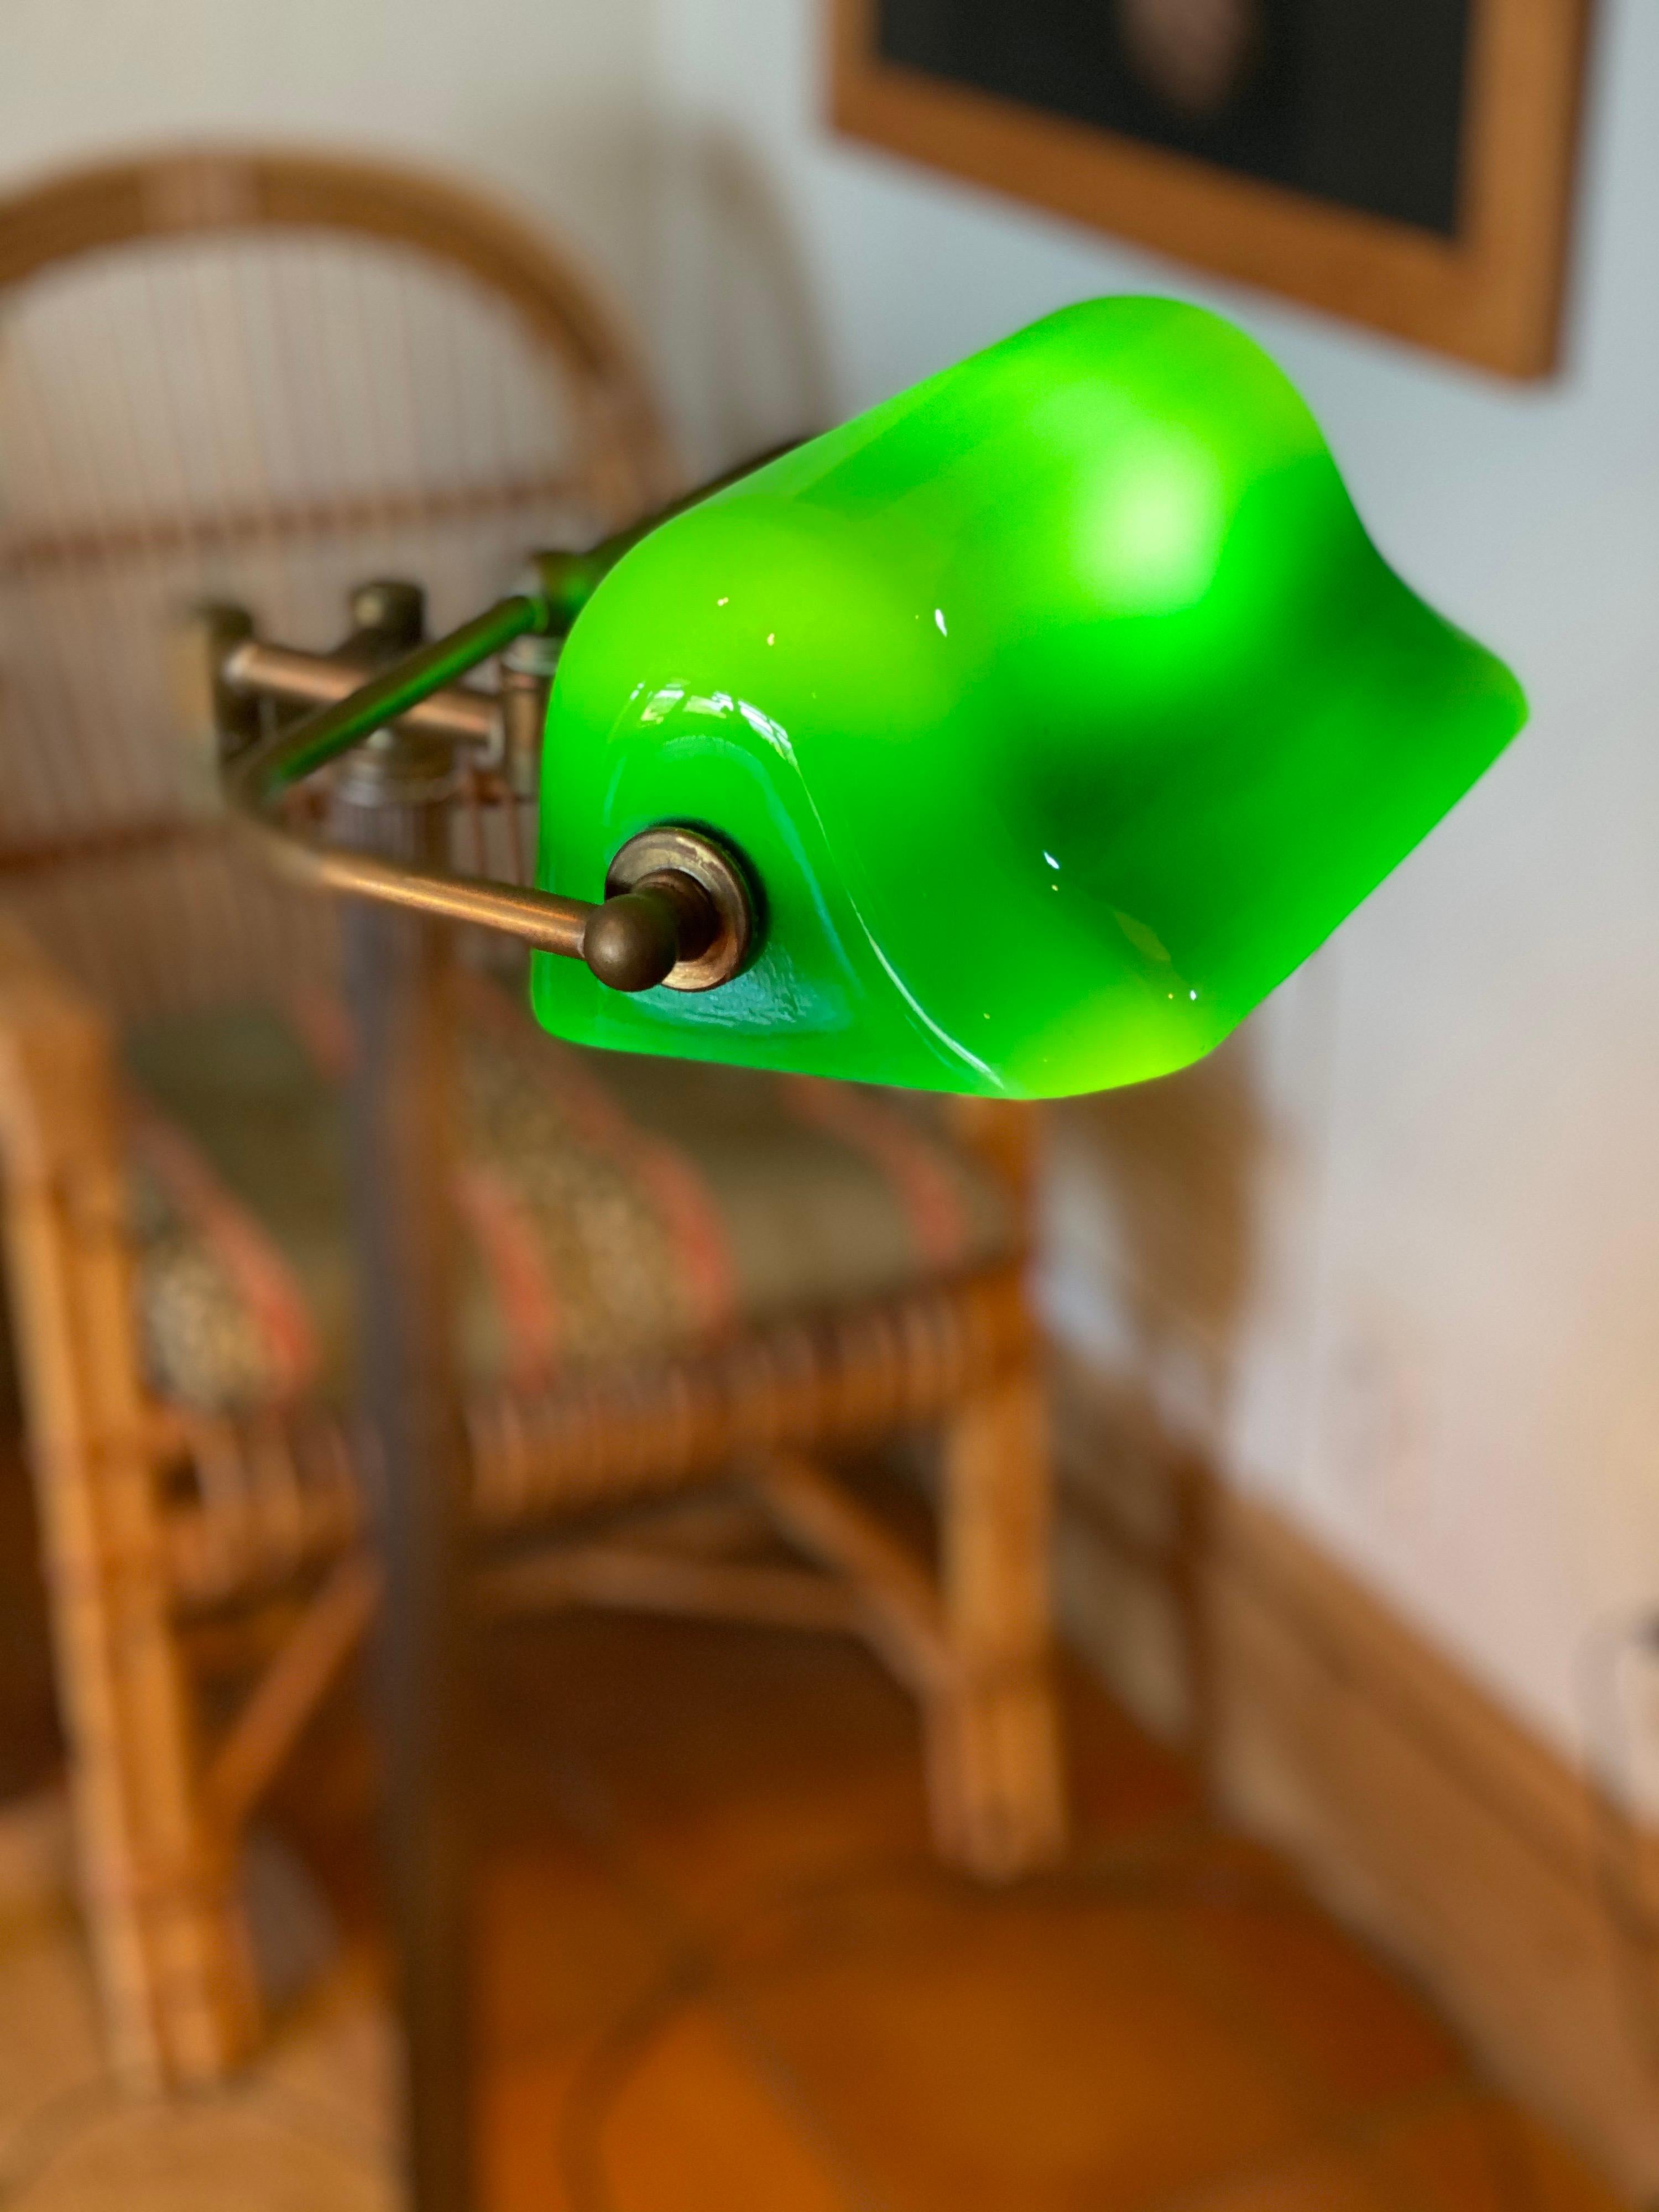 This beautiful emerlite lamp is named for its bluish-green cased glass shade. The green hue it omits was said to encourage positive energy and focus. It's no wonder this lamp would later be coined 'the banker's lamp' as it rose to popularity during